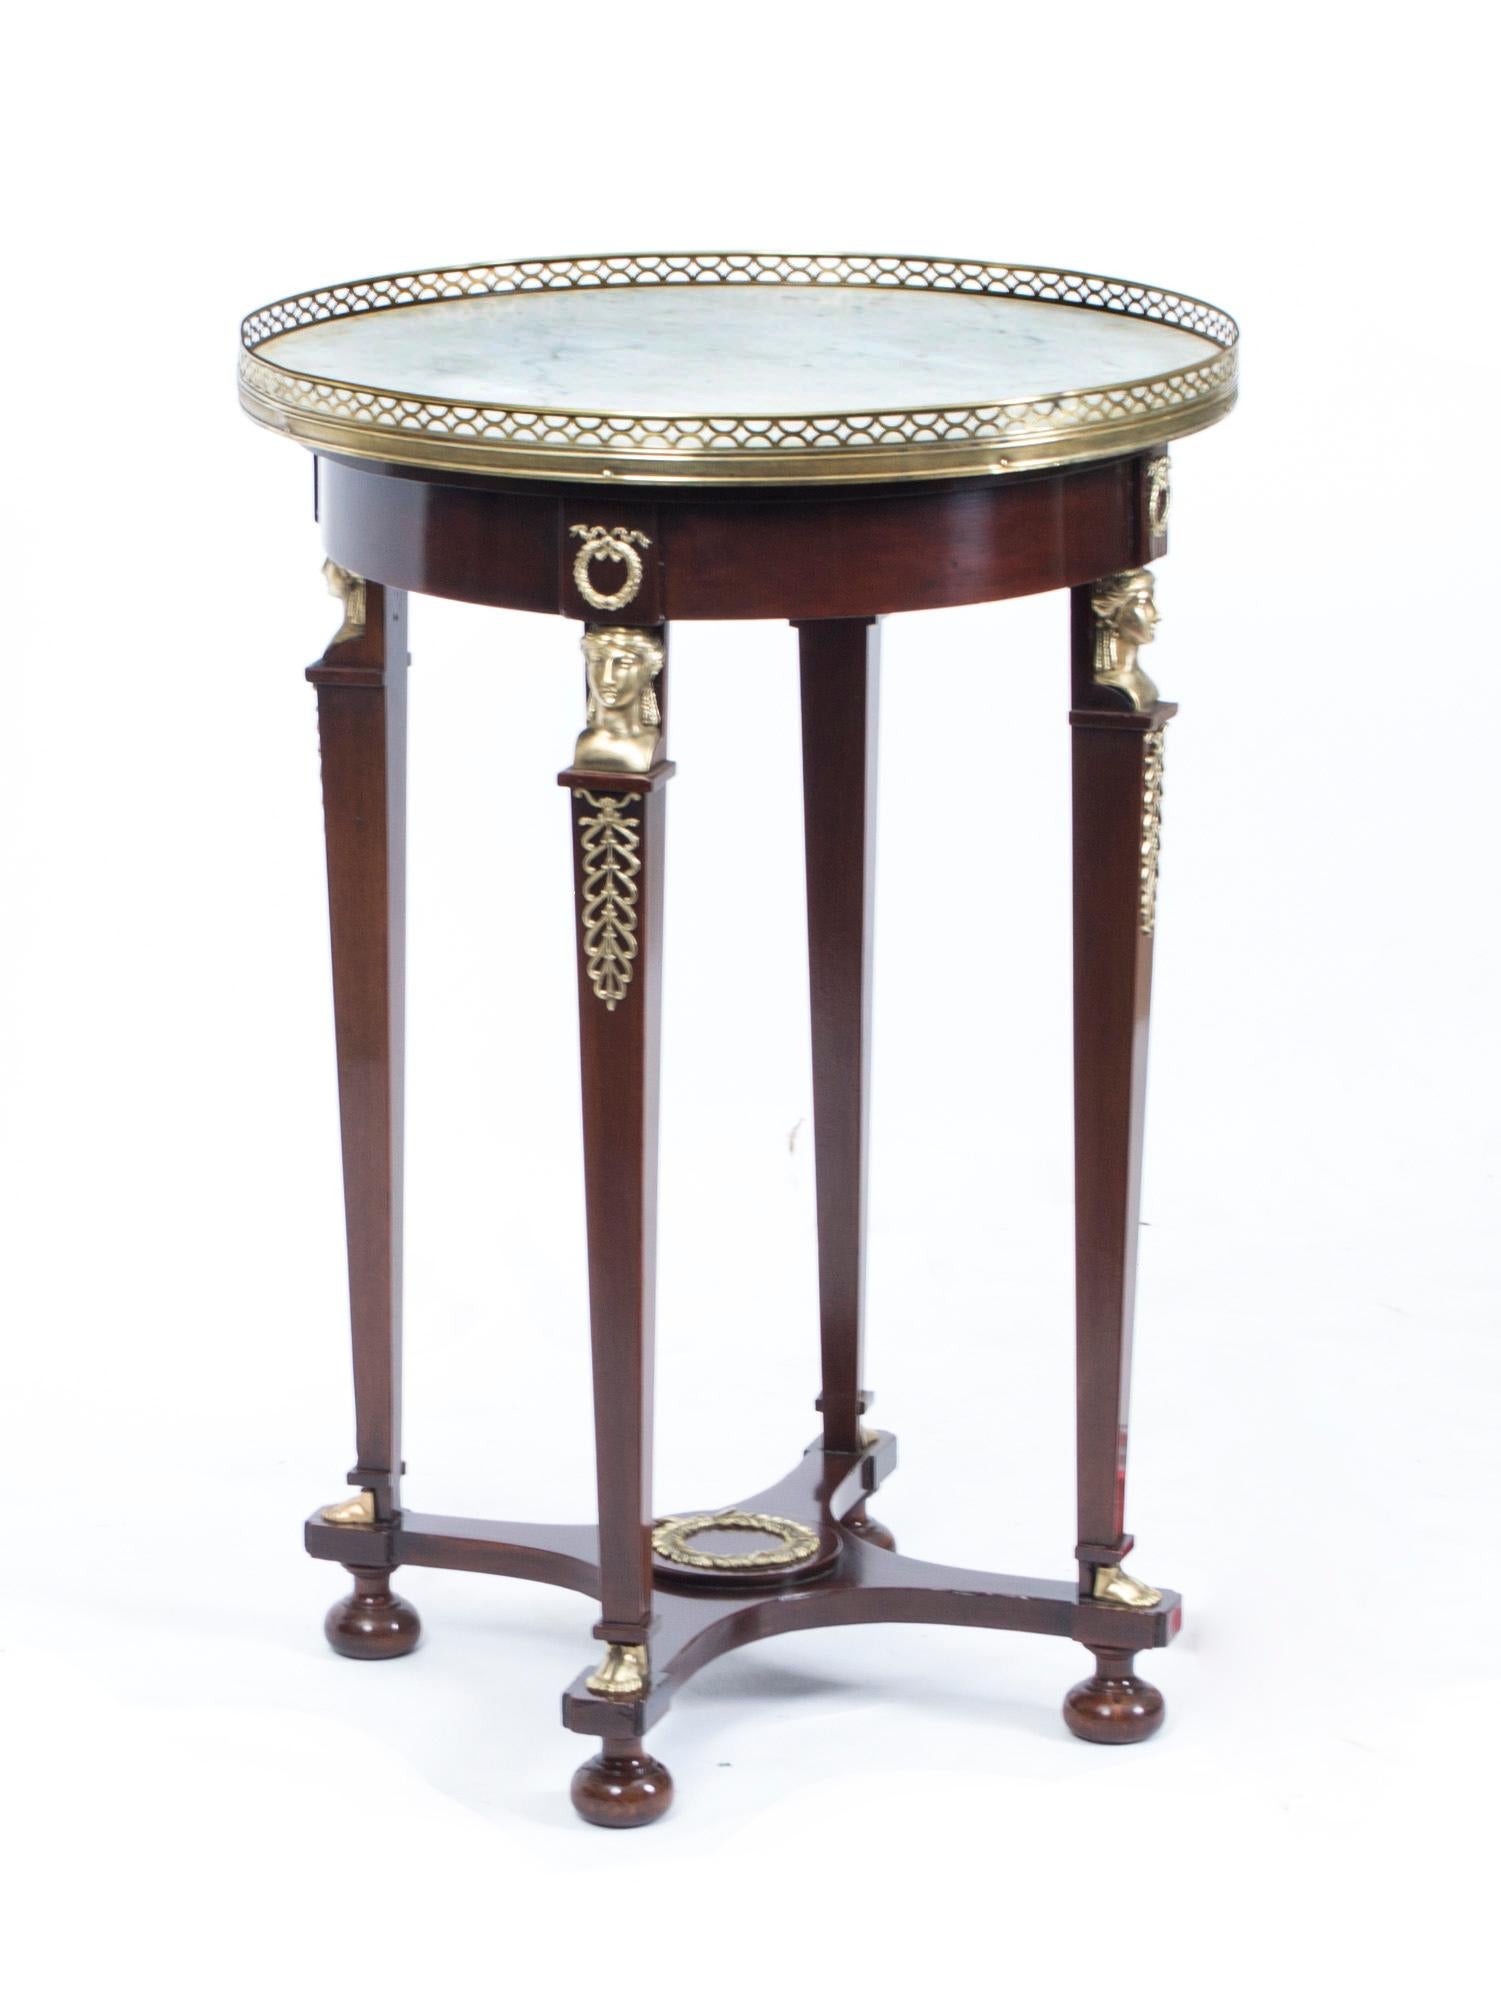 Antique French Empire Marble & Ormolu Occasional Table 19th Century For Sale 6